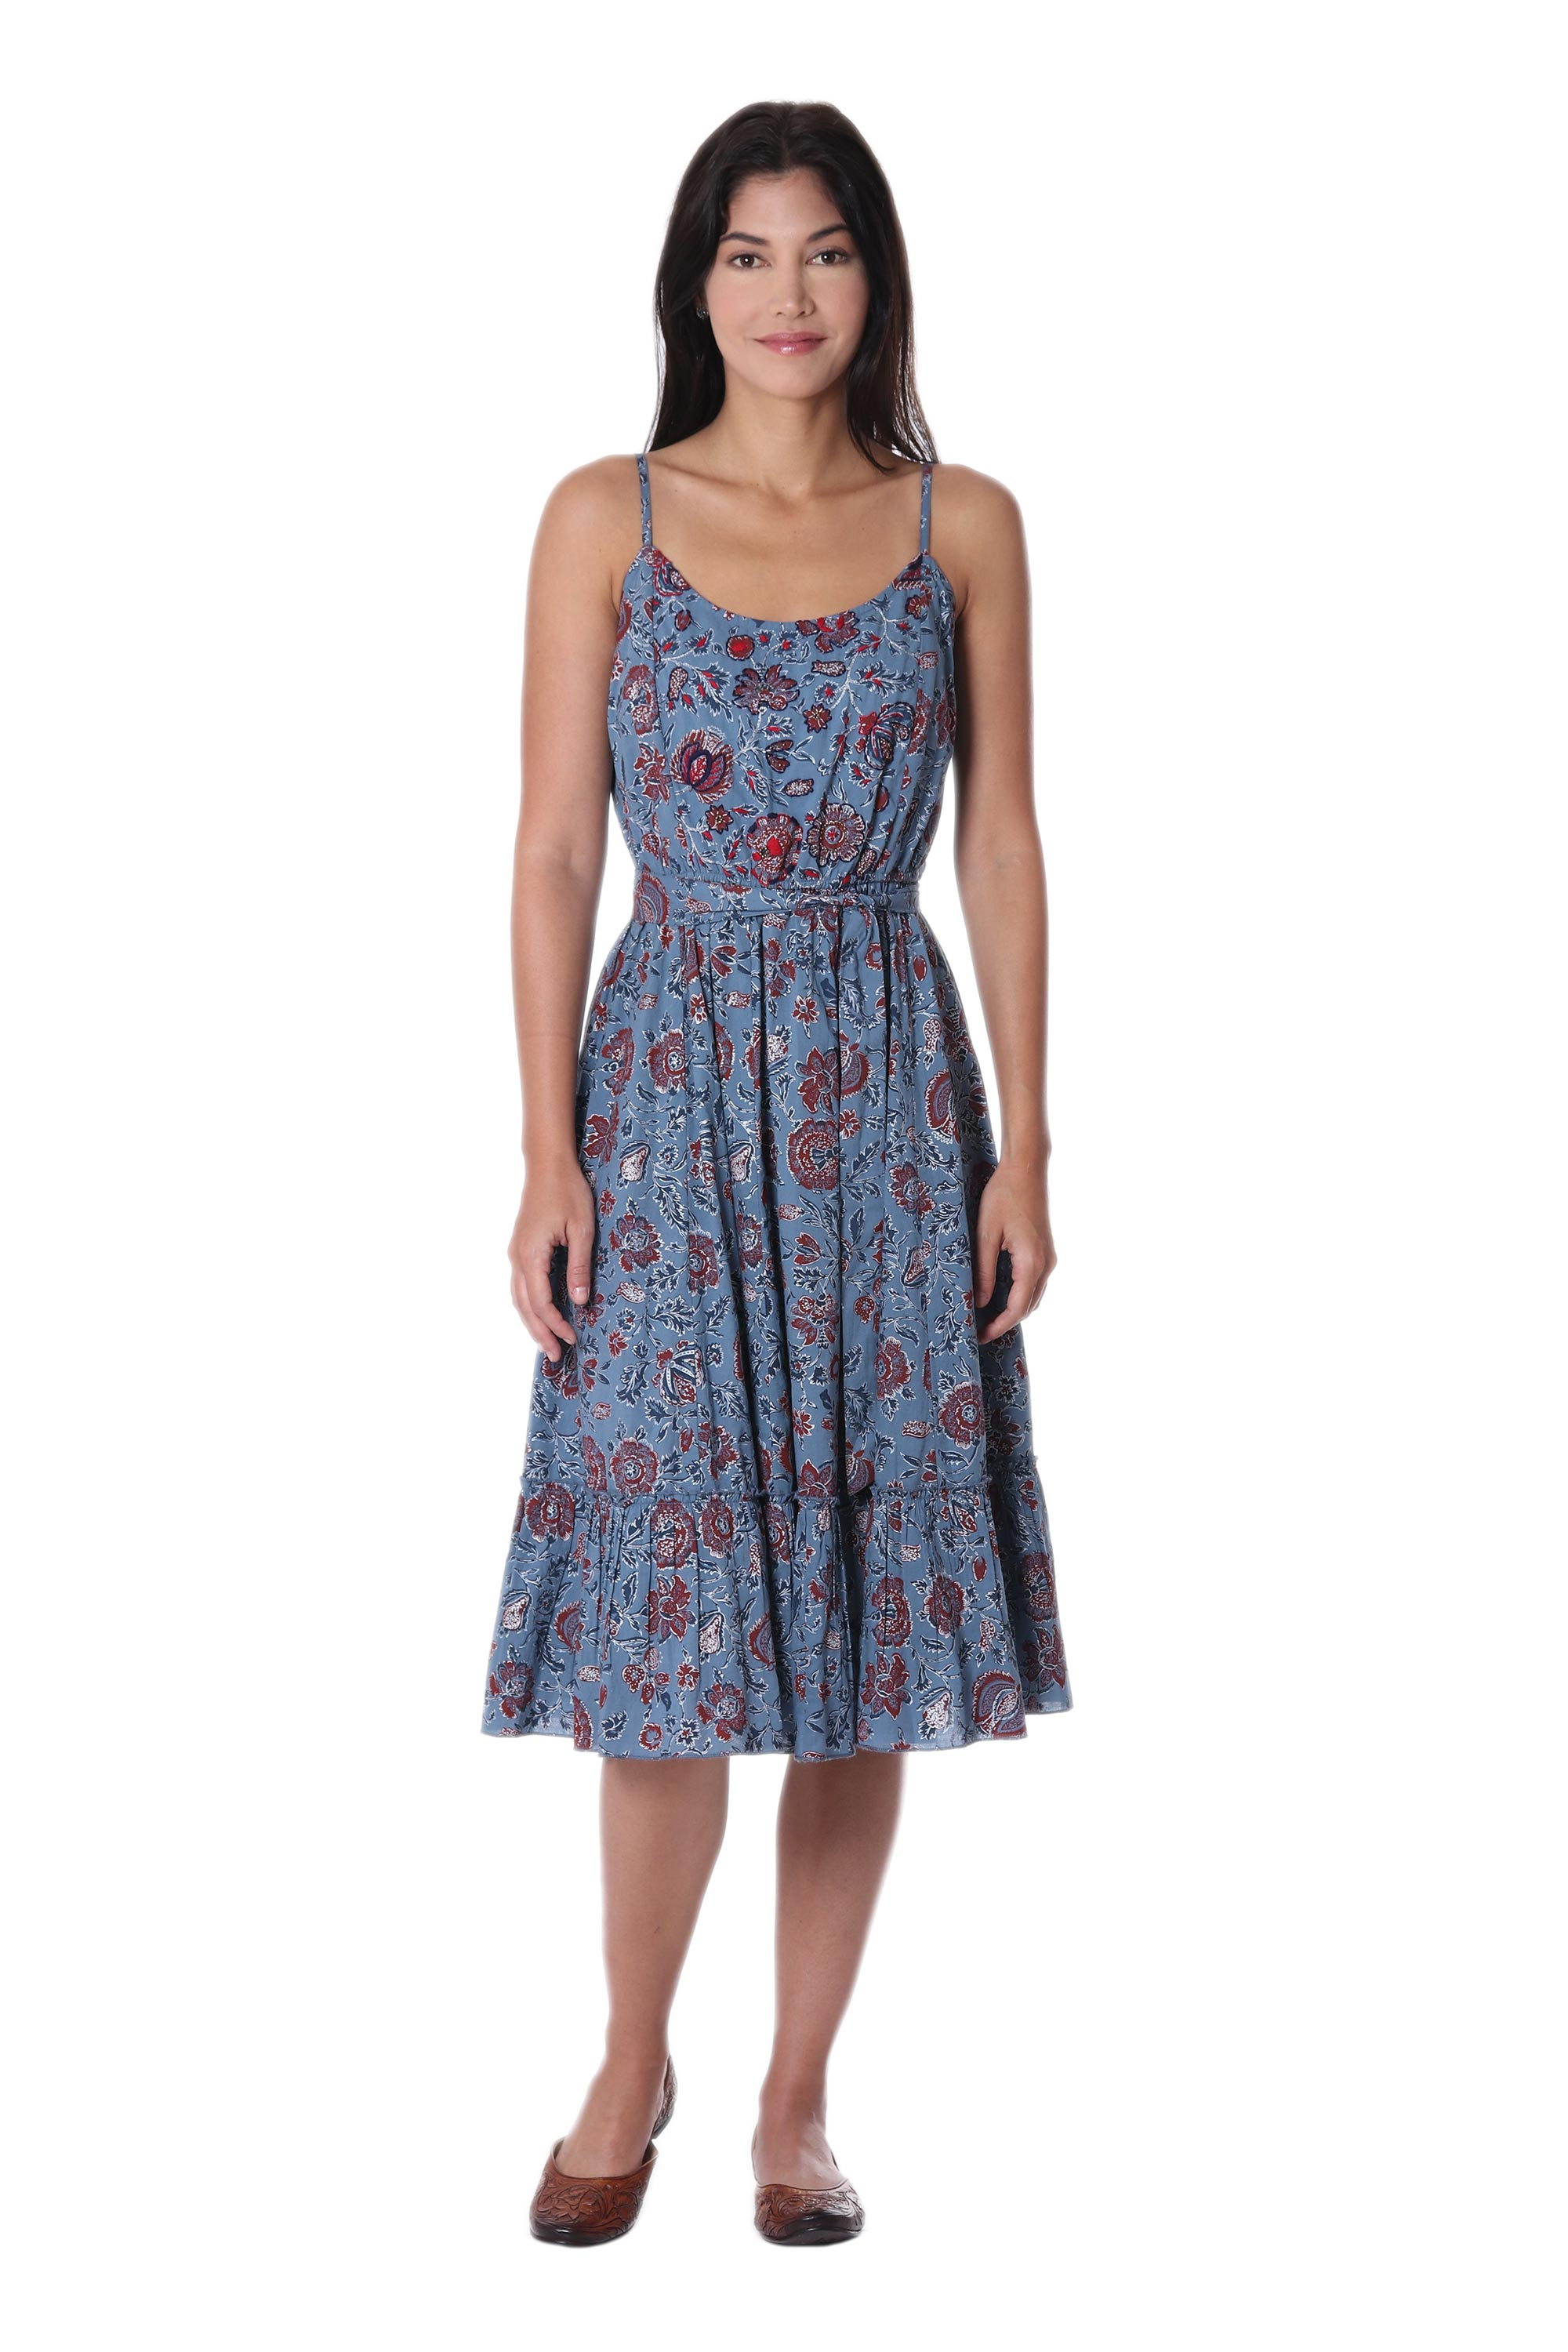 Floral Printed Cotton Sundress in Cerulean from India - Garden Bliss ...